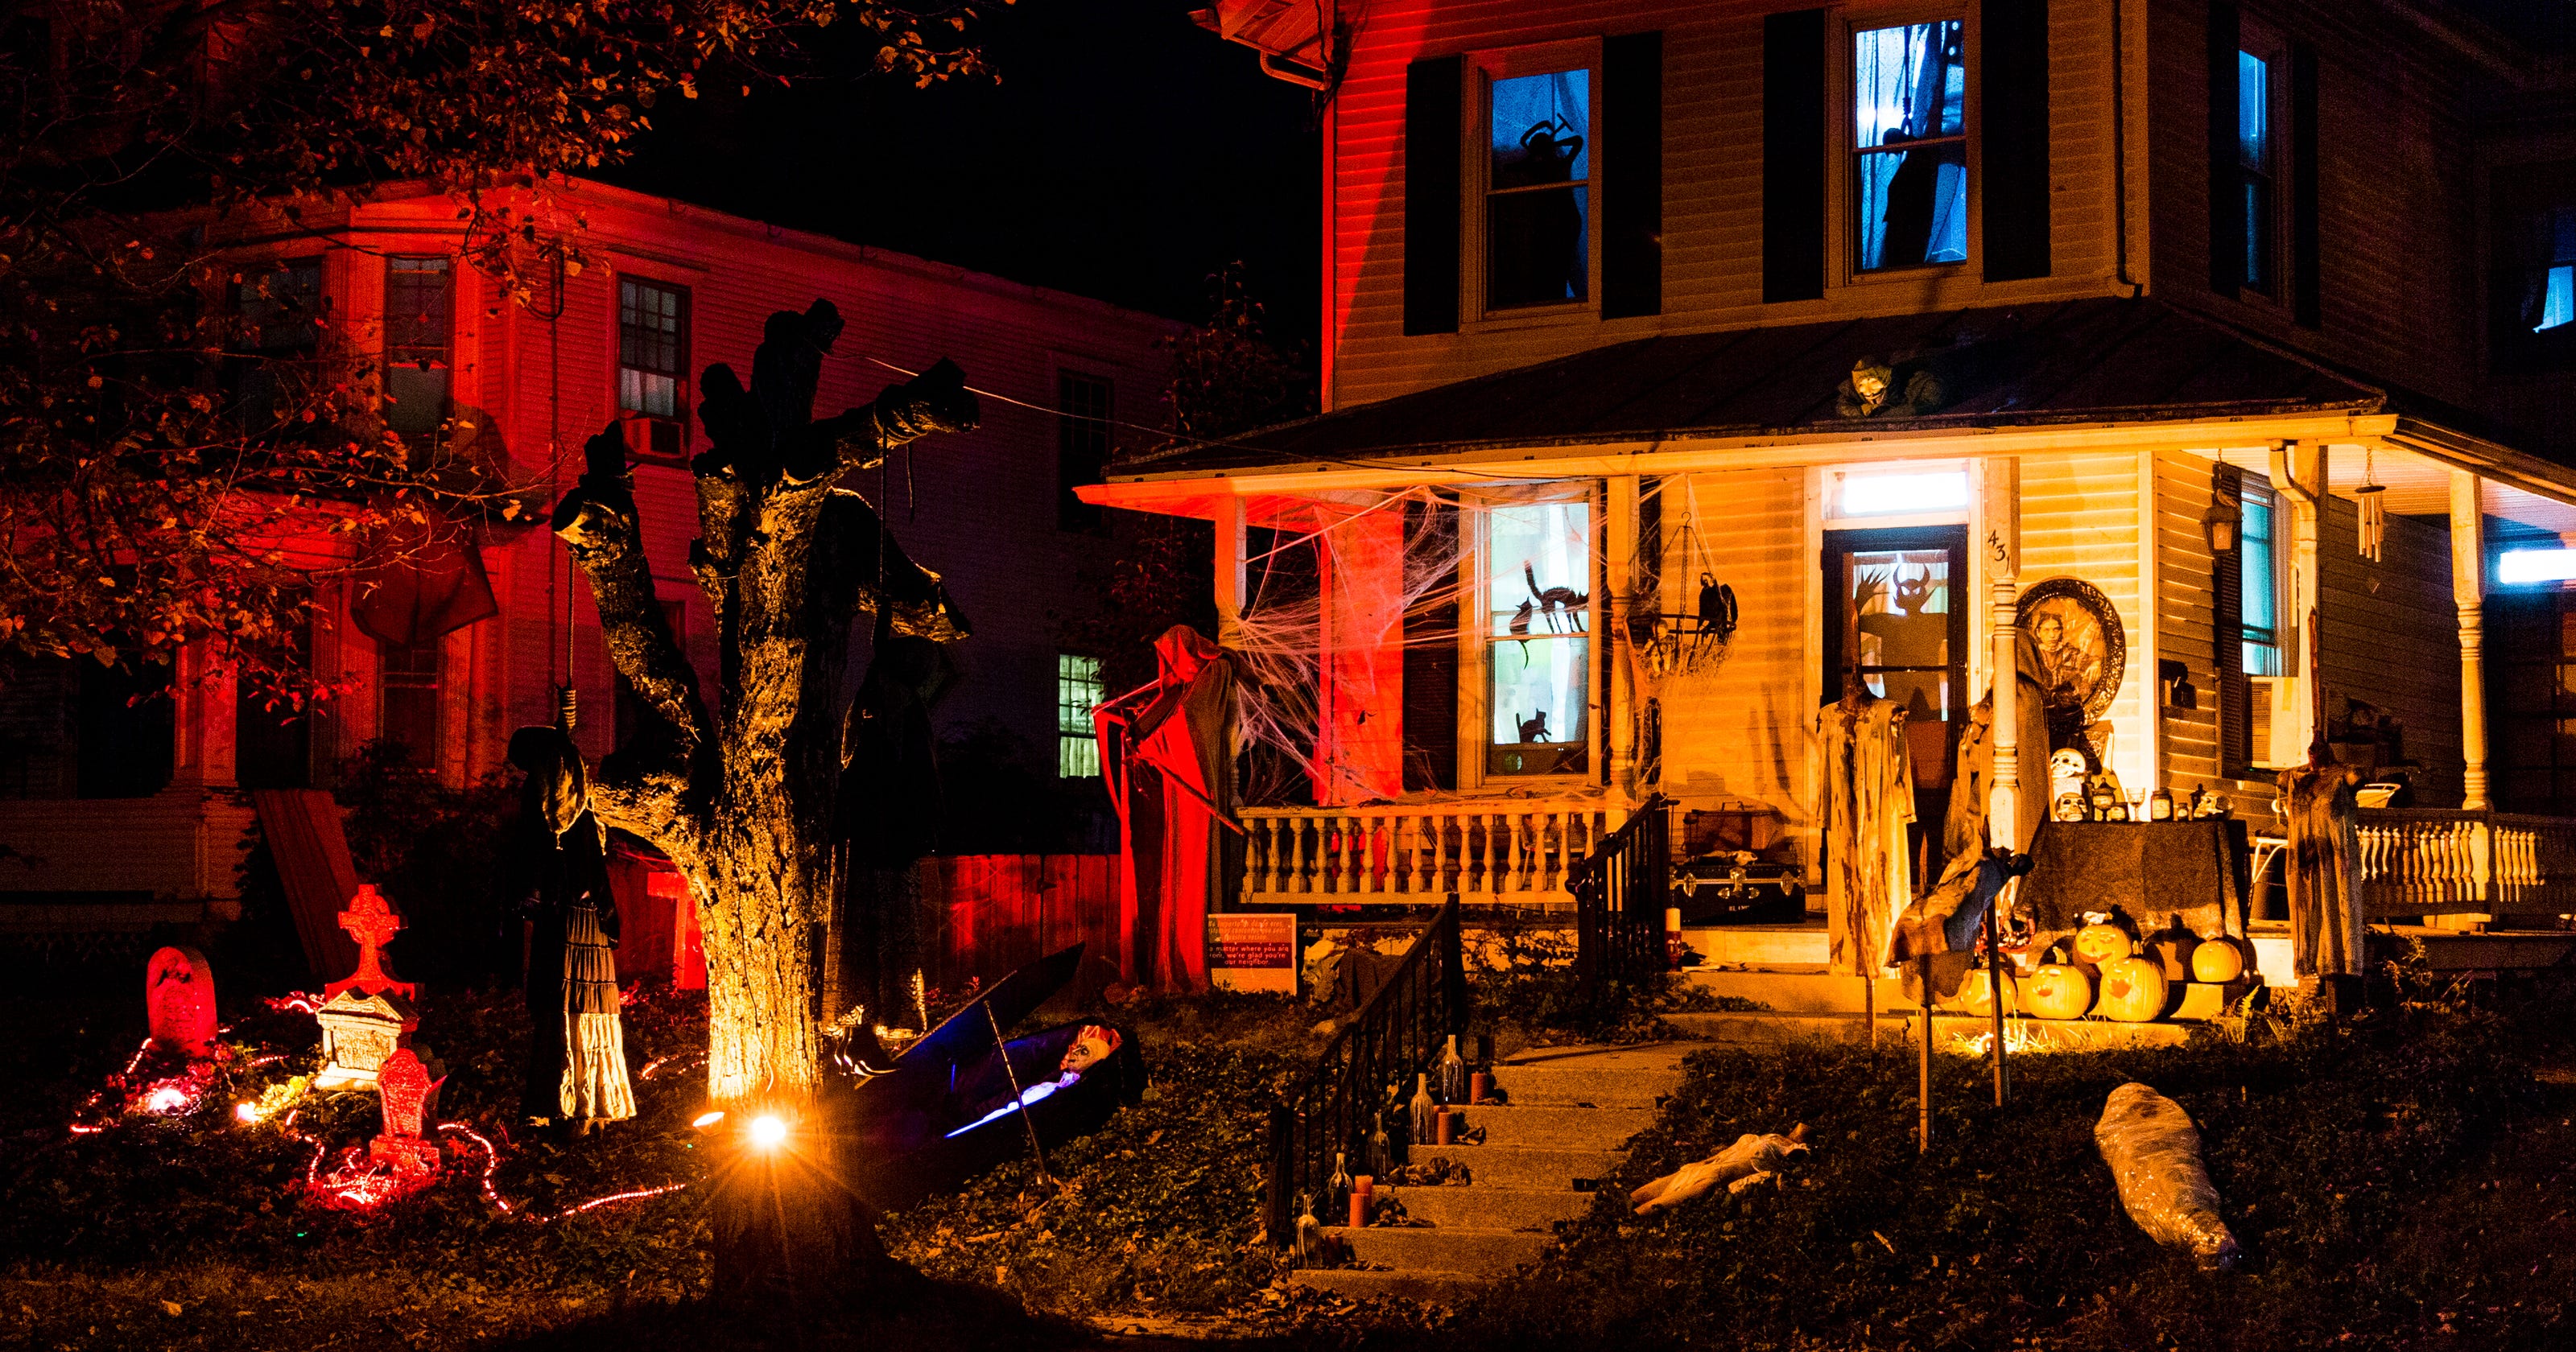 Annville Home S Halloween Decorations Spook Some Residents